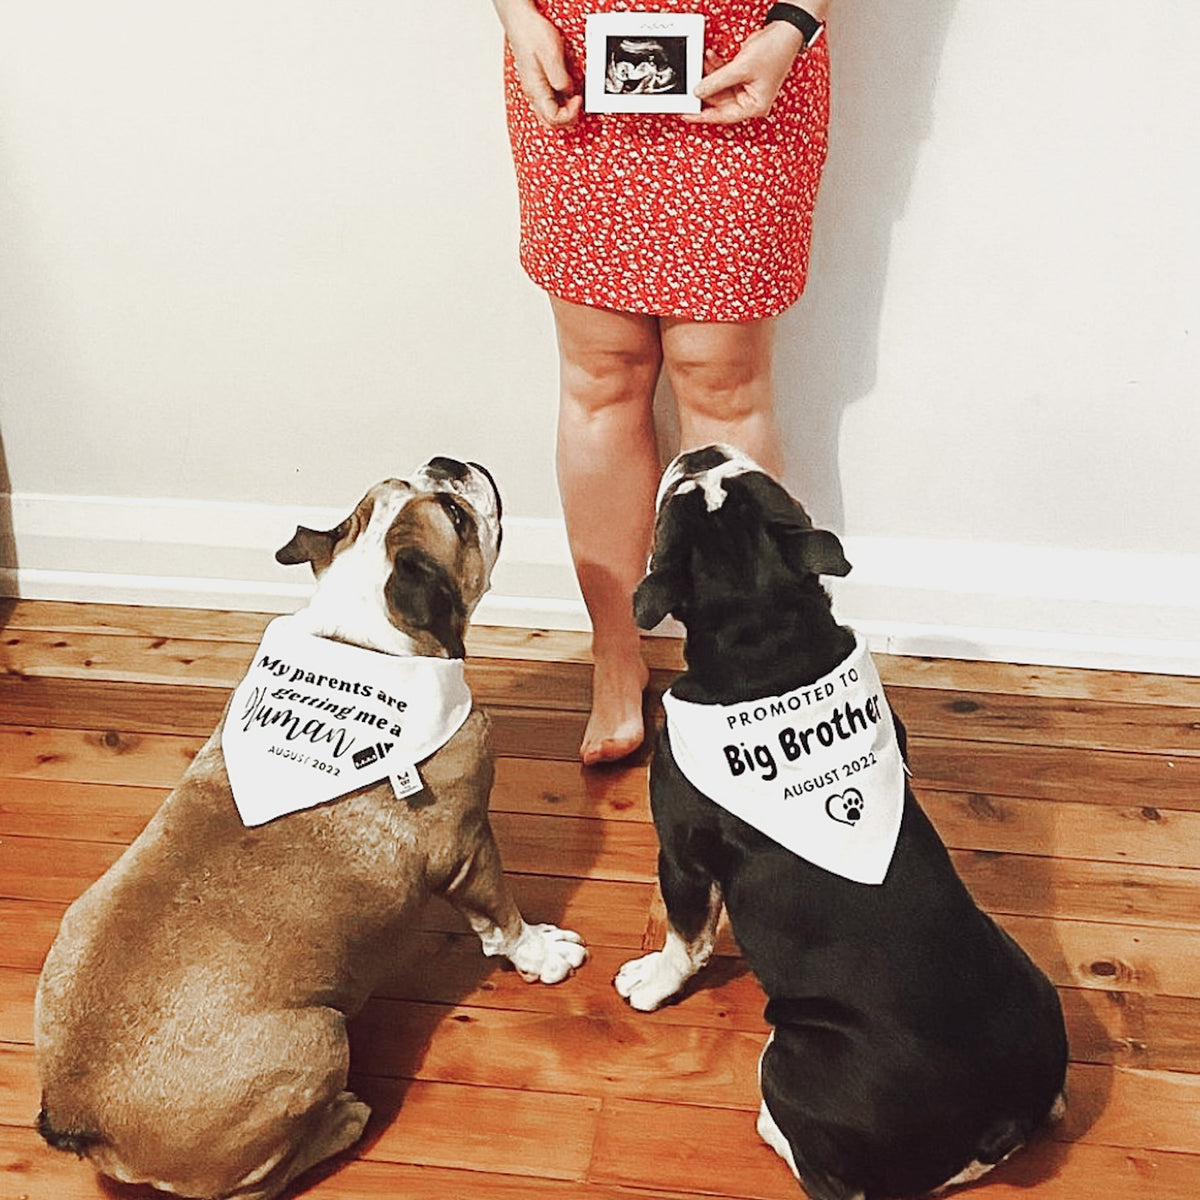 Pregnancy Announcement Dog Bandana - Customisable Due Date - My Parents are Getting me a Human